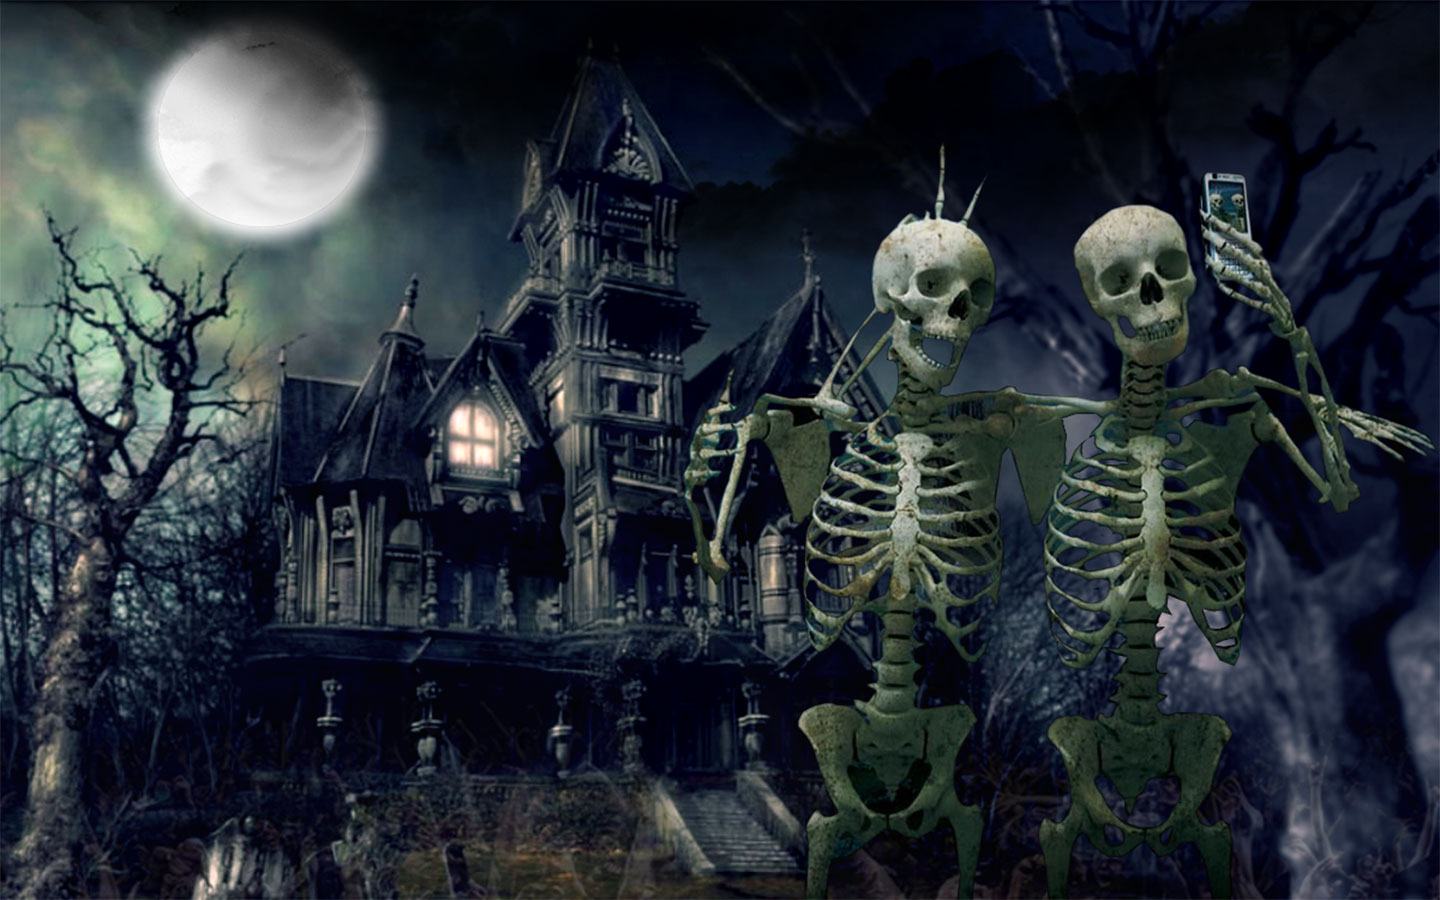  Free Wallpapers Backgrounds   Haunted House Skeletons wallpaper